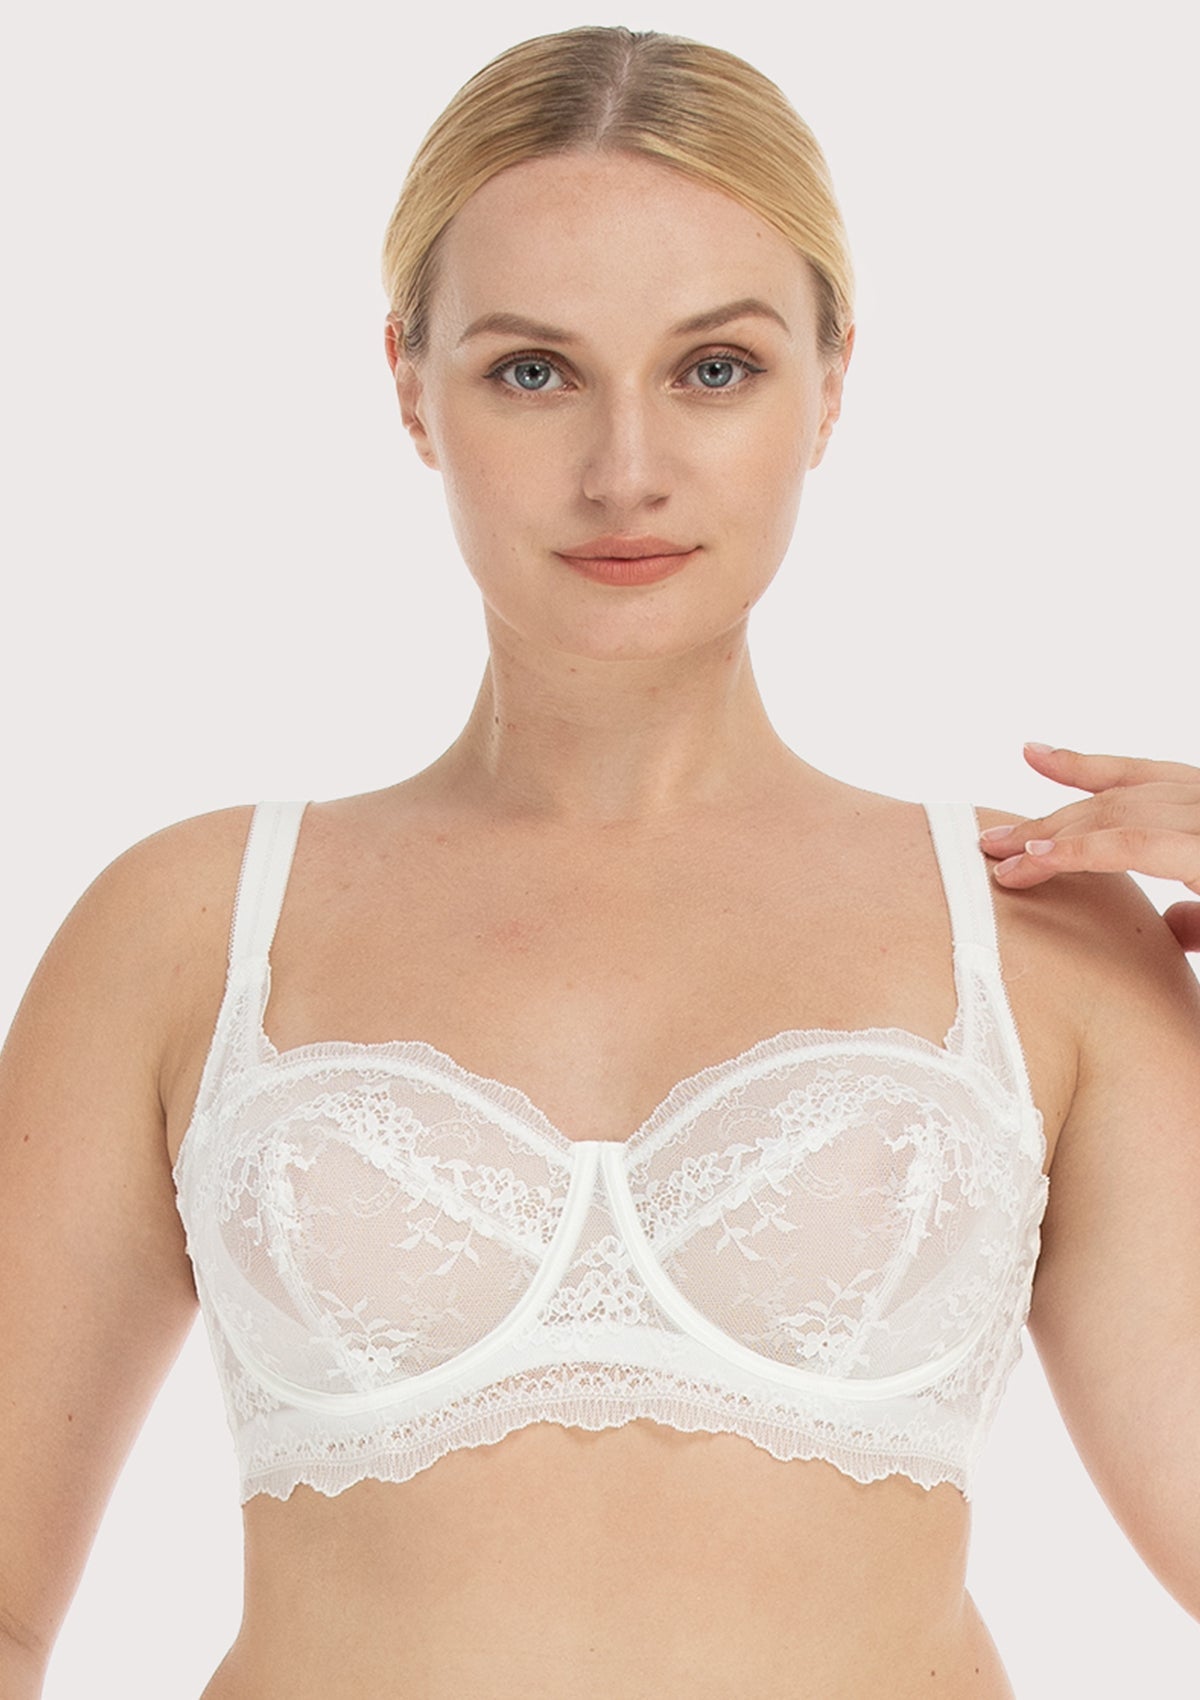 HSIA I Do Floral Lace Bridal Balconette Beautiful Bra For Special Day - Burgundy / 40 / D